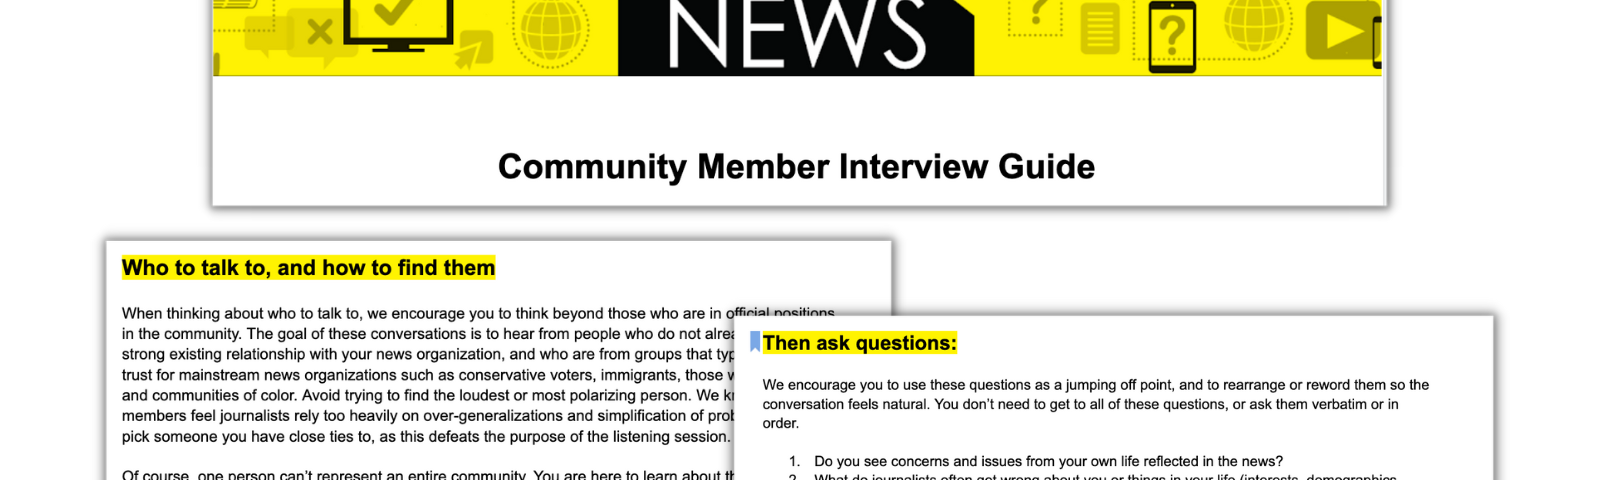 Multiple screenshots of Trusting News’ newly revised community interview guide, which you can find at bit.ly/communityinterviewguide.